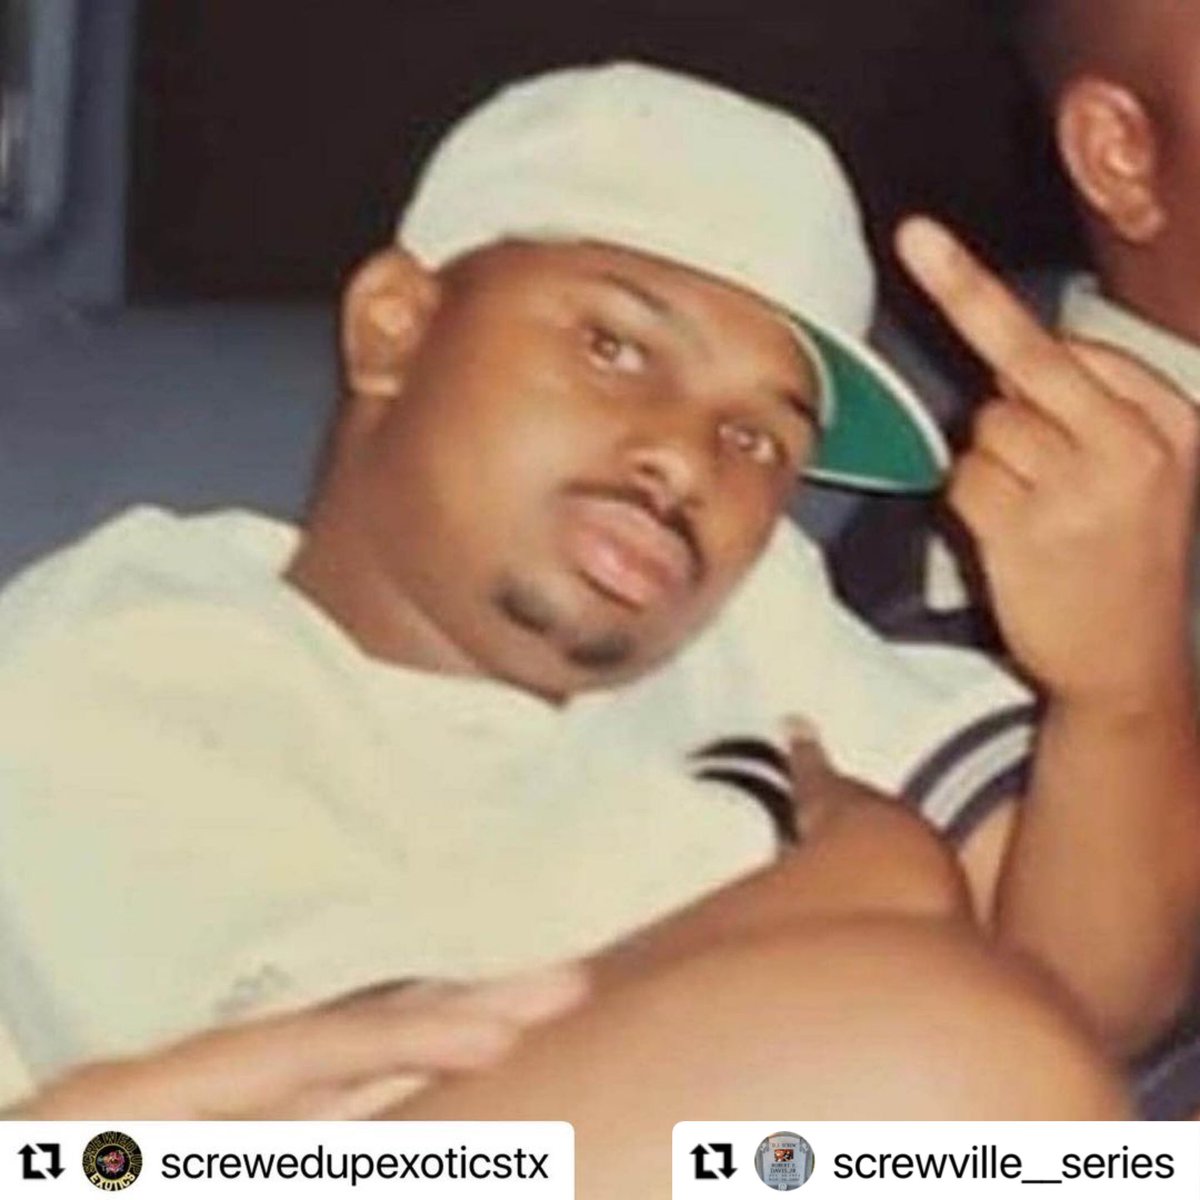 I Done Screwed Up every city,state,town and hood #Djscrew